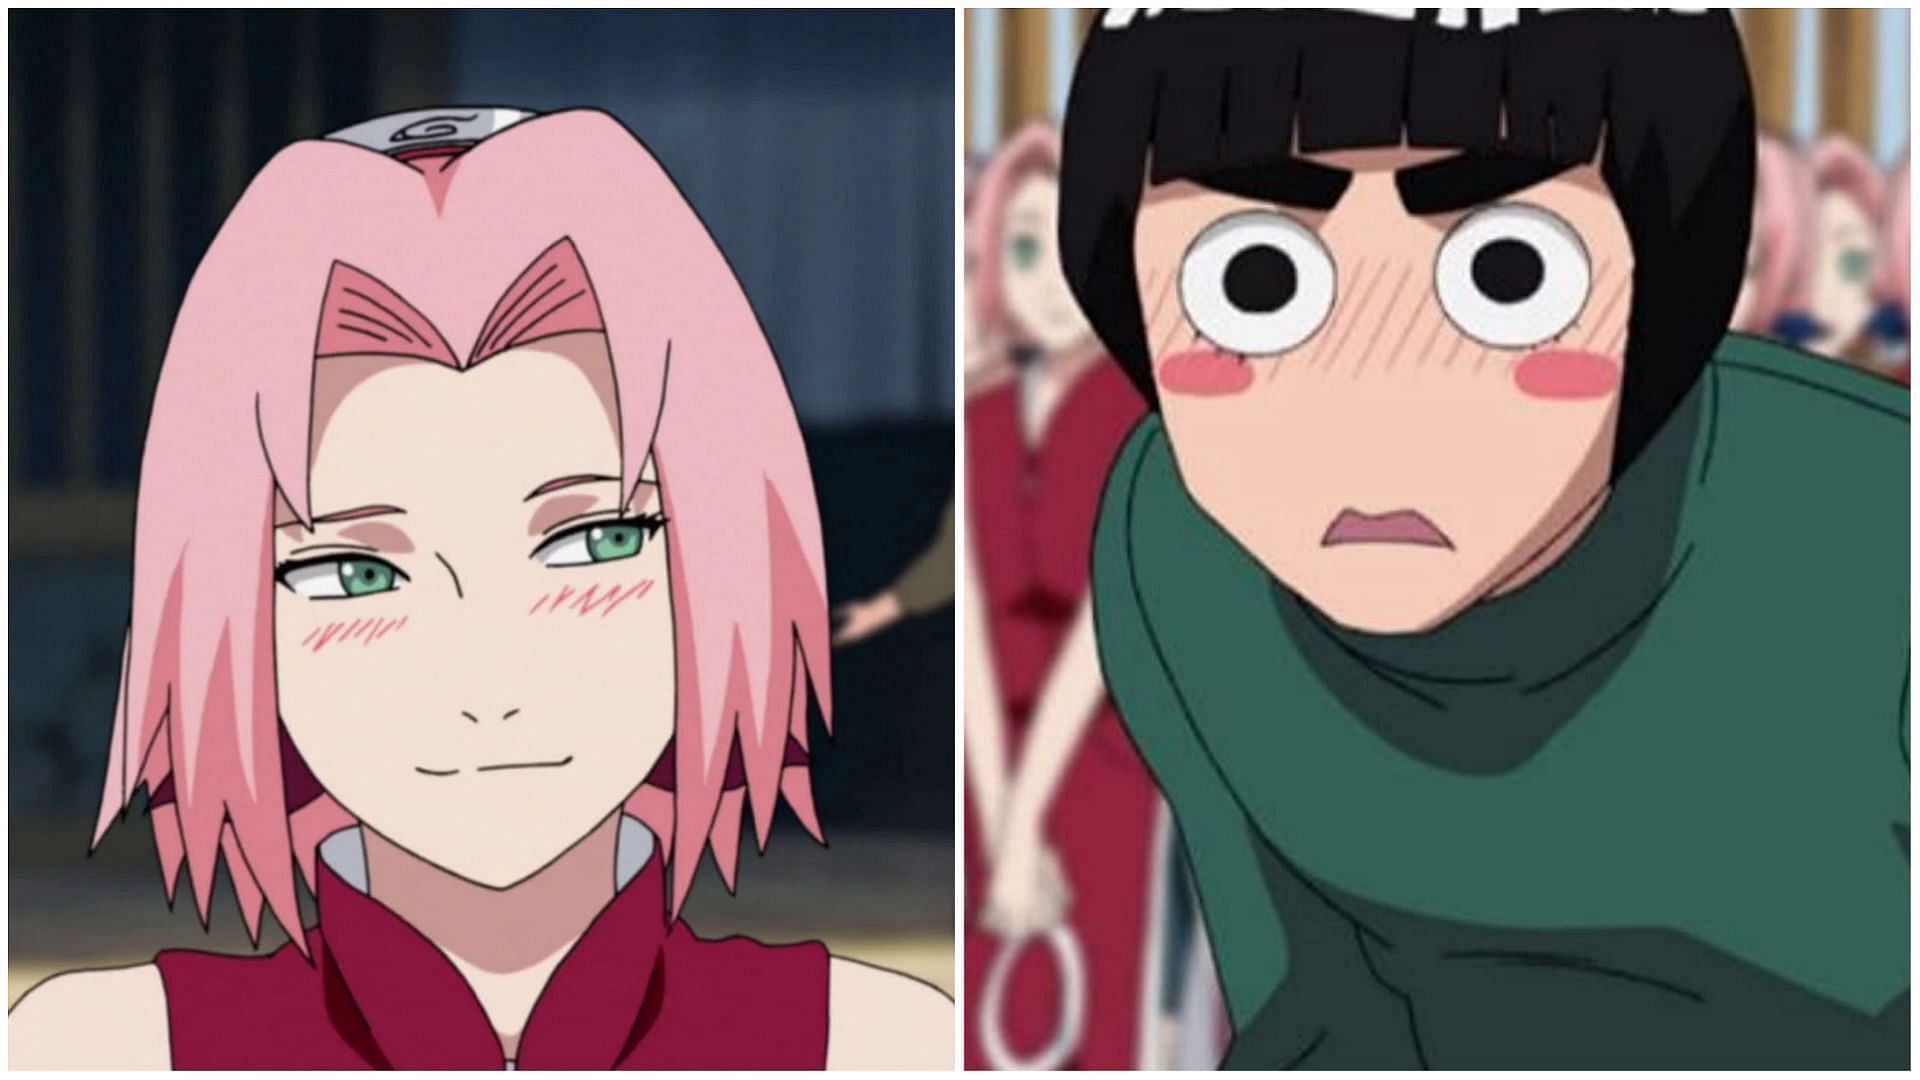  Why Sakura should have been with Rock Lee (Images by Studio Pierrot)